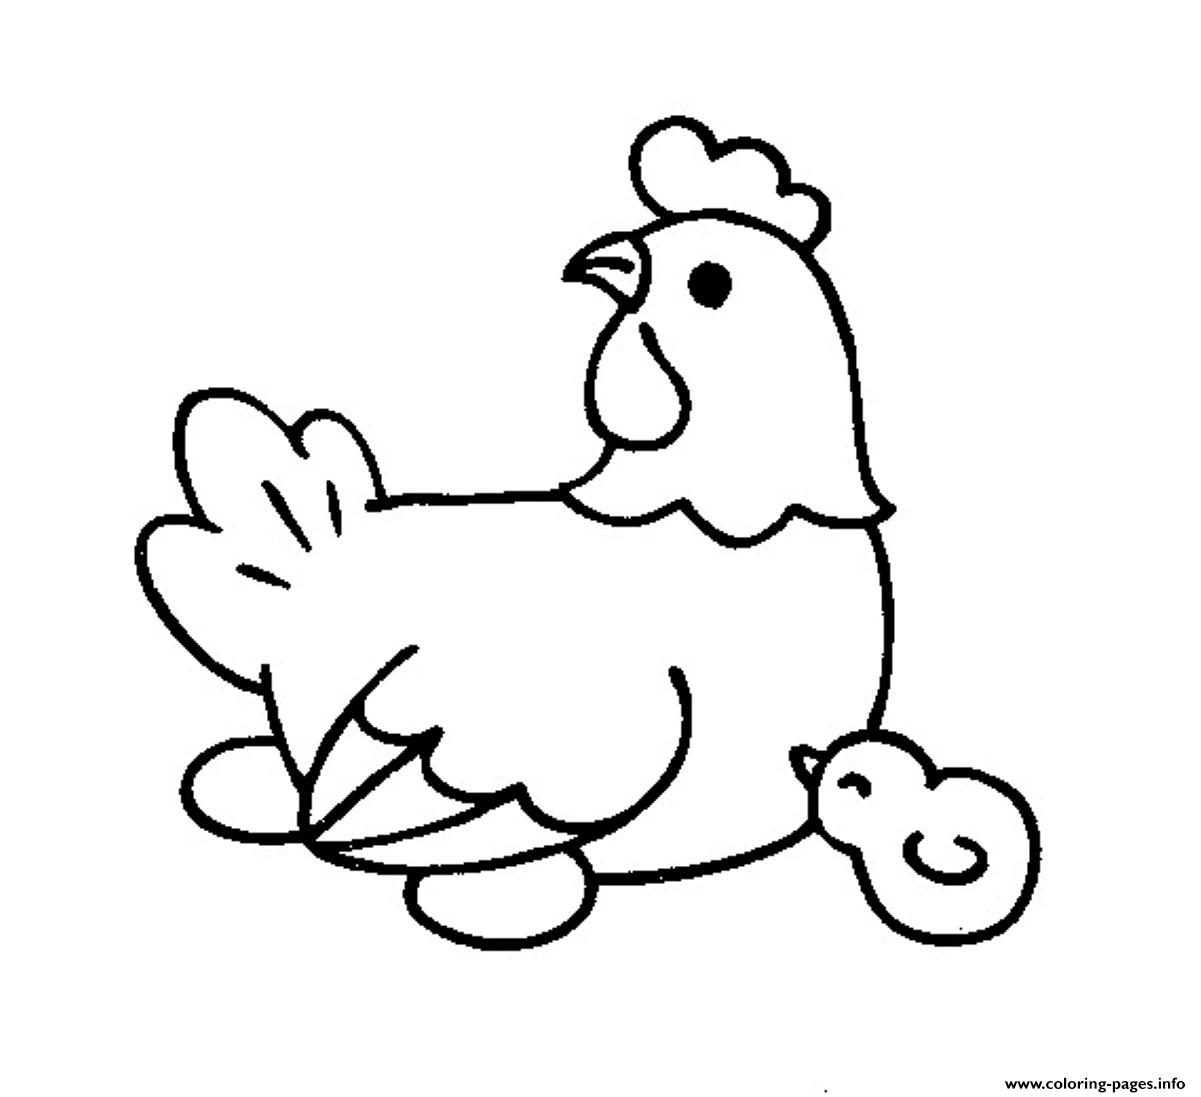 Cute Farm Animal S A Hen And Chick18d37 coloring